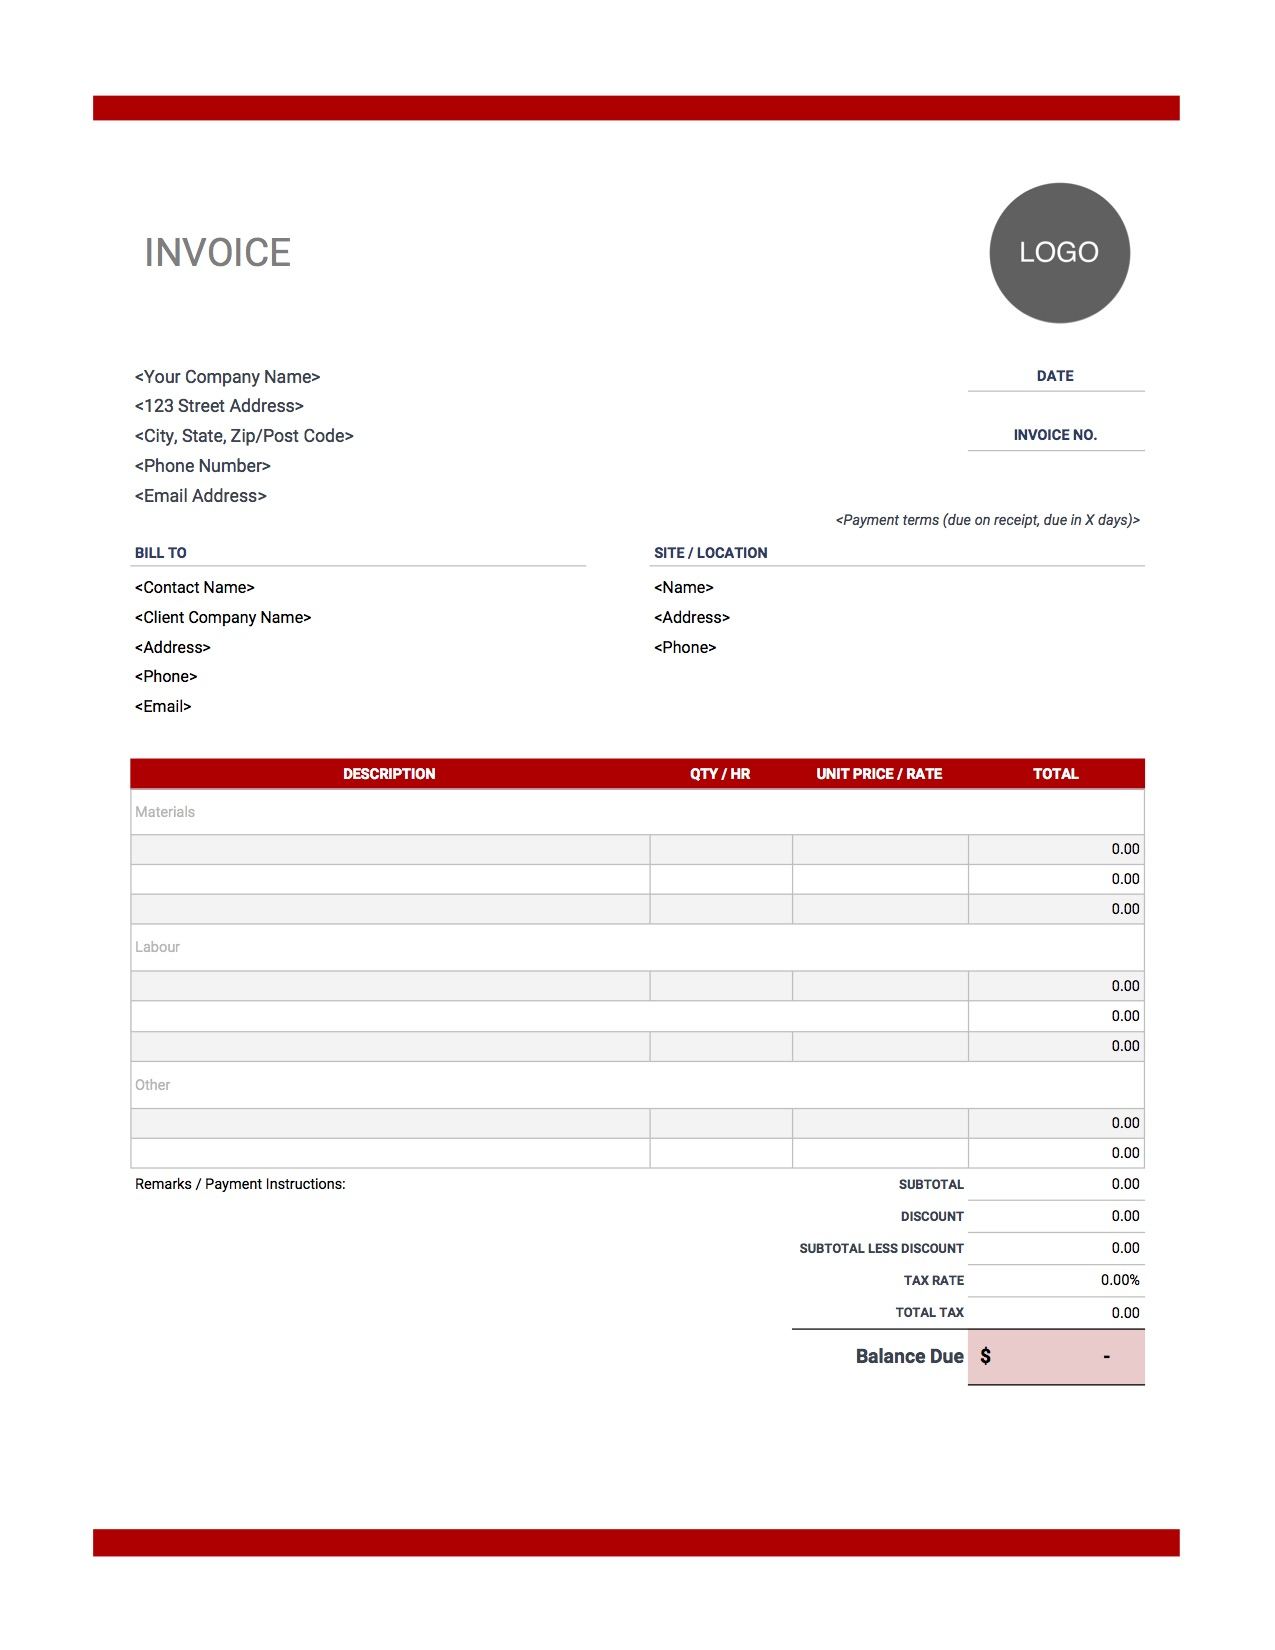 professional services invoice template excel